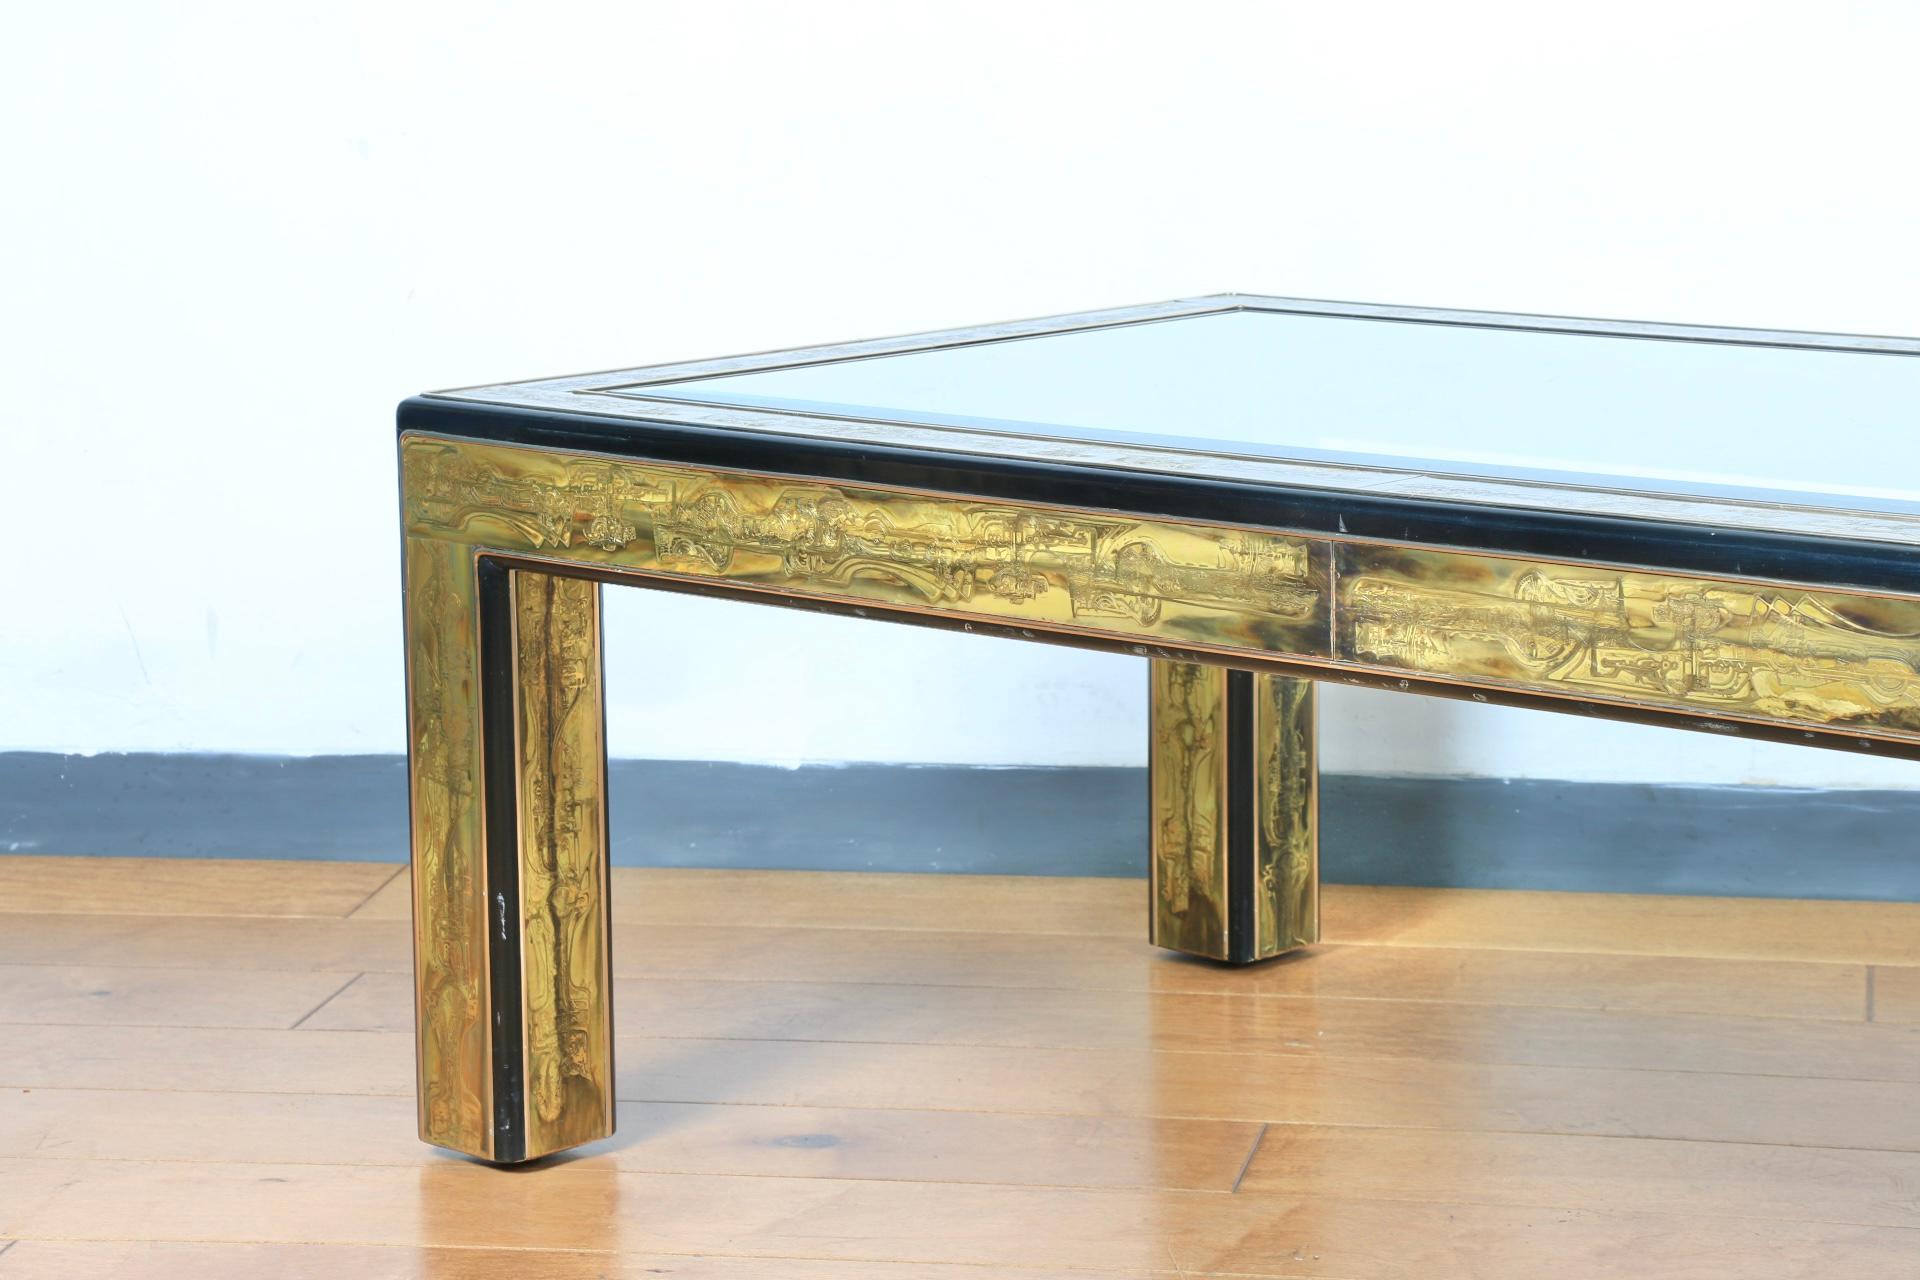 Beautiful Mastercraft coffee table with glass insert top. Very well made brass base. Will look amazing in any place. No damages or broken parts. Original glass top is in vintage used condition.